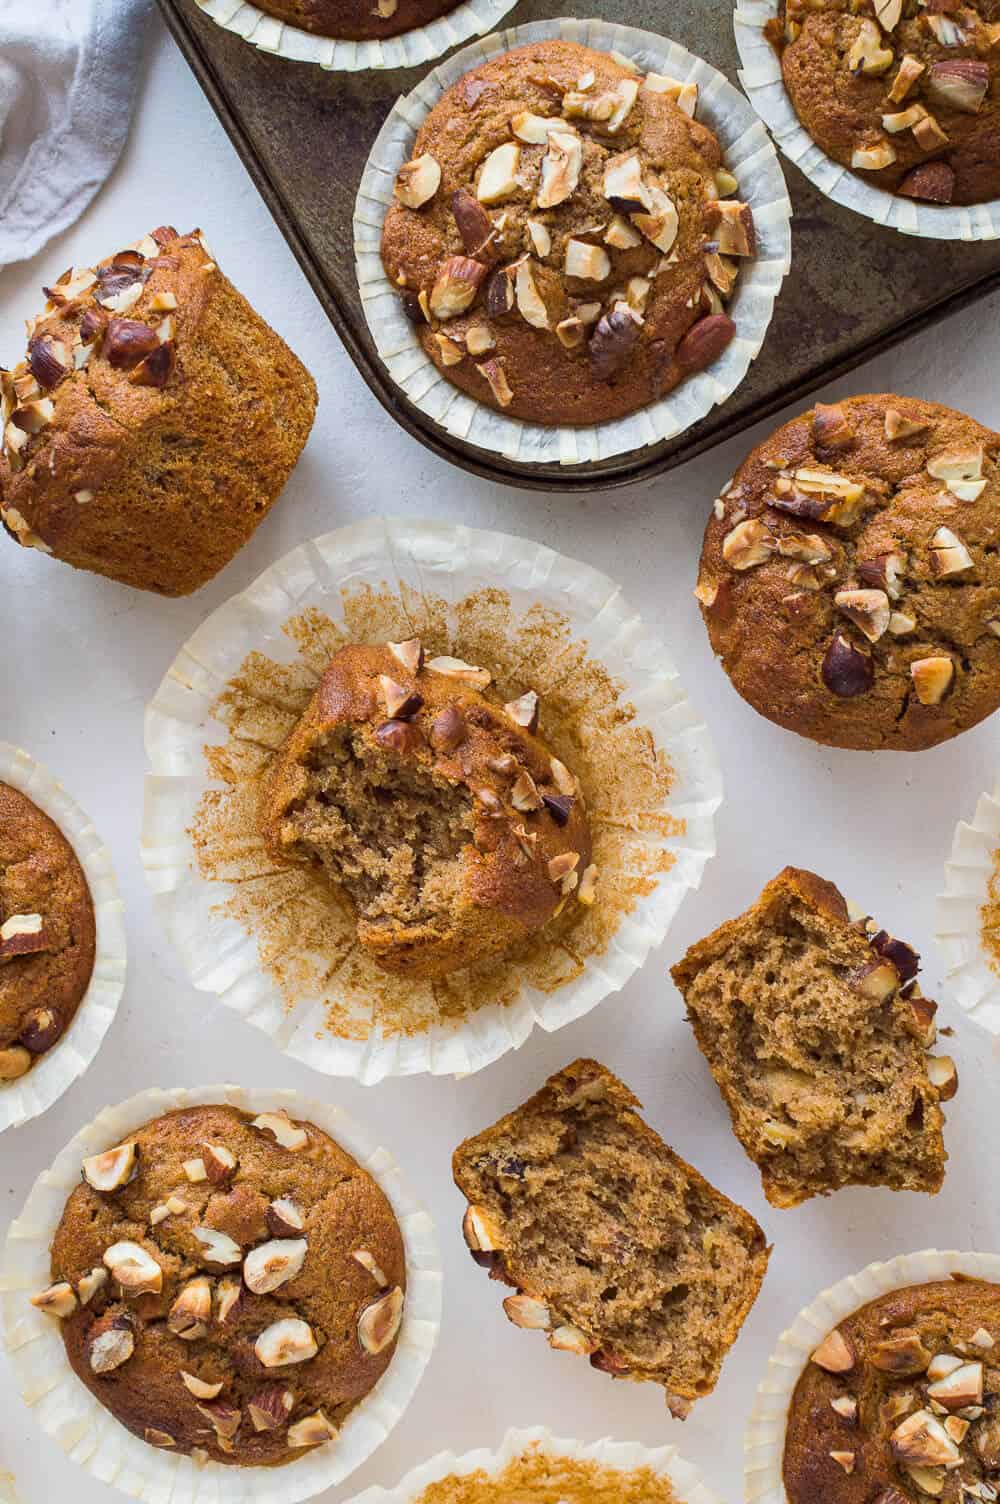 Banana nut muffins - moist, flavourful, quick and easy to make vegan banana muffins filled with chopped mixed nuts. Perfect for breakfast or snacking.